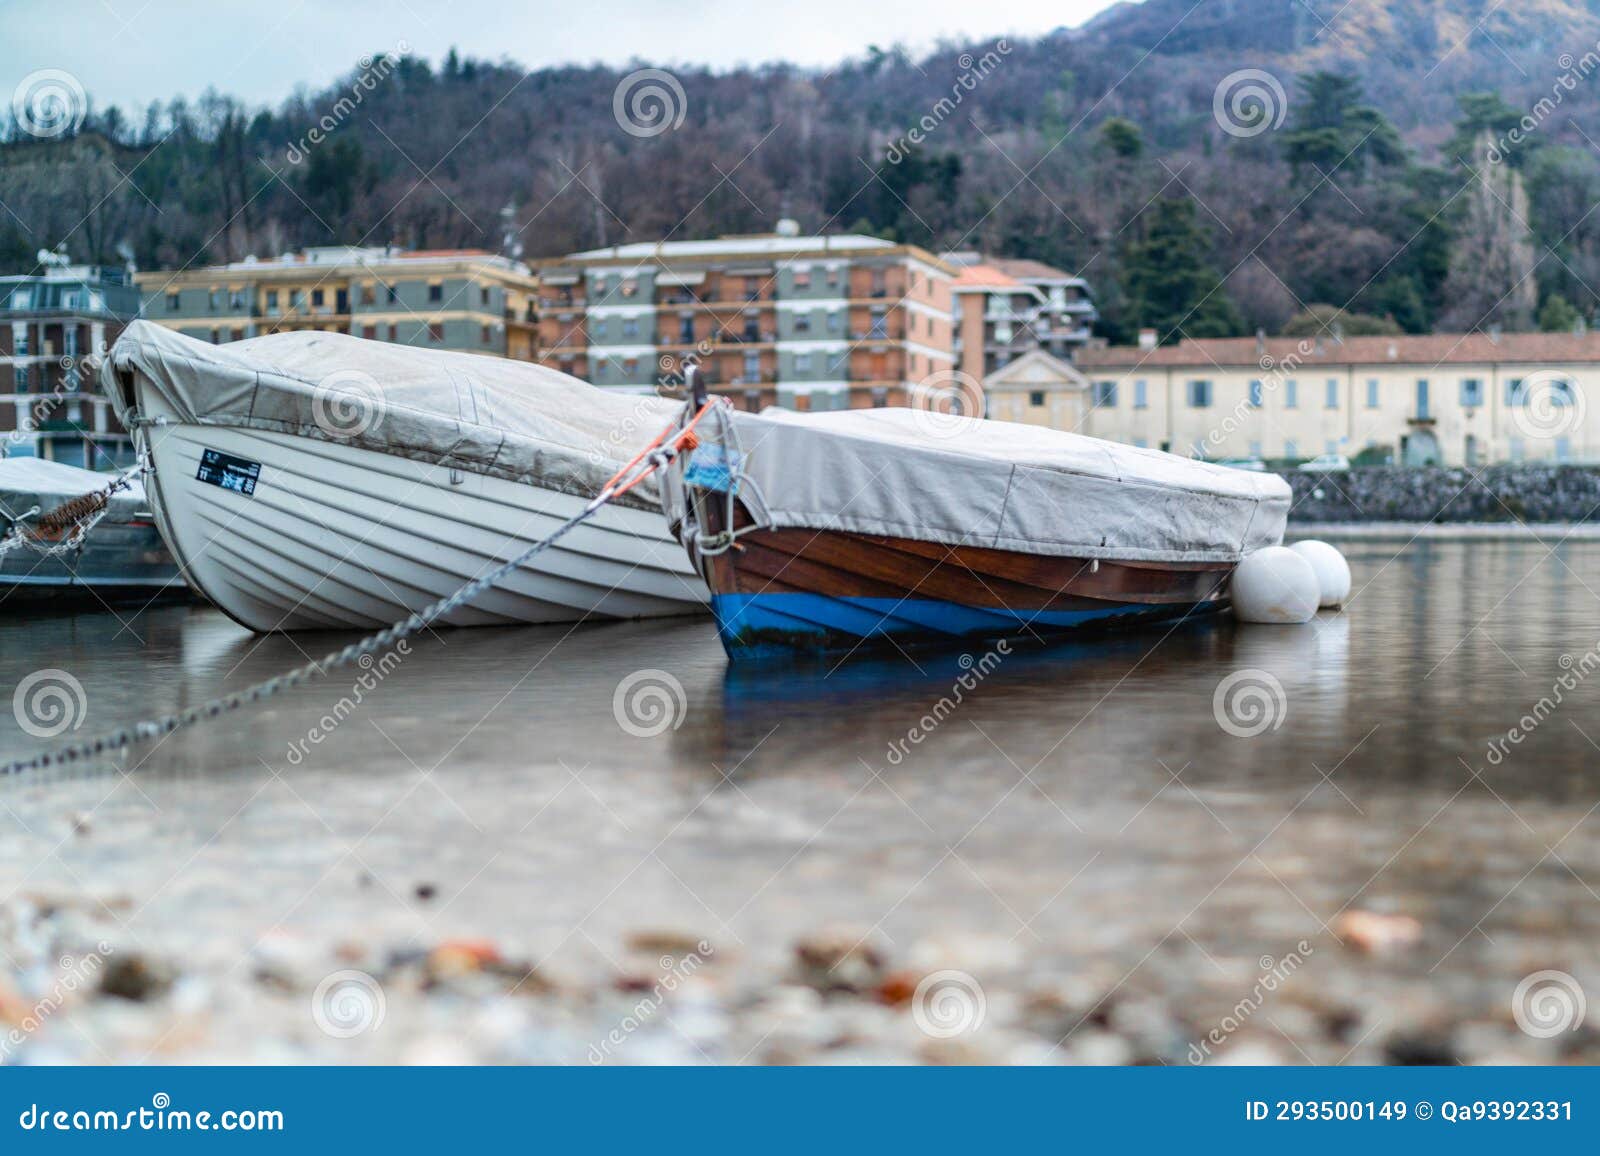 Small Fishing Boats with Fishing Net and Equipment, Motor Boat or Sail Boat  Floating Stock Image - Image of white, ocean: 293500149